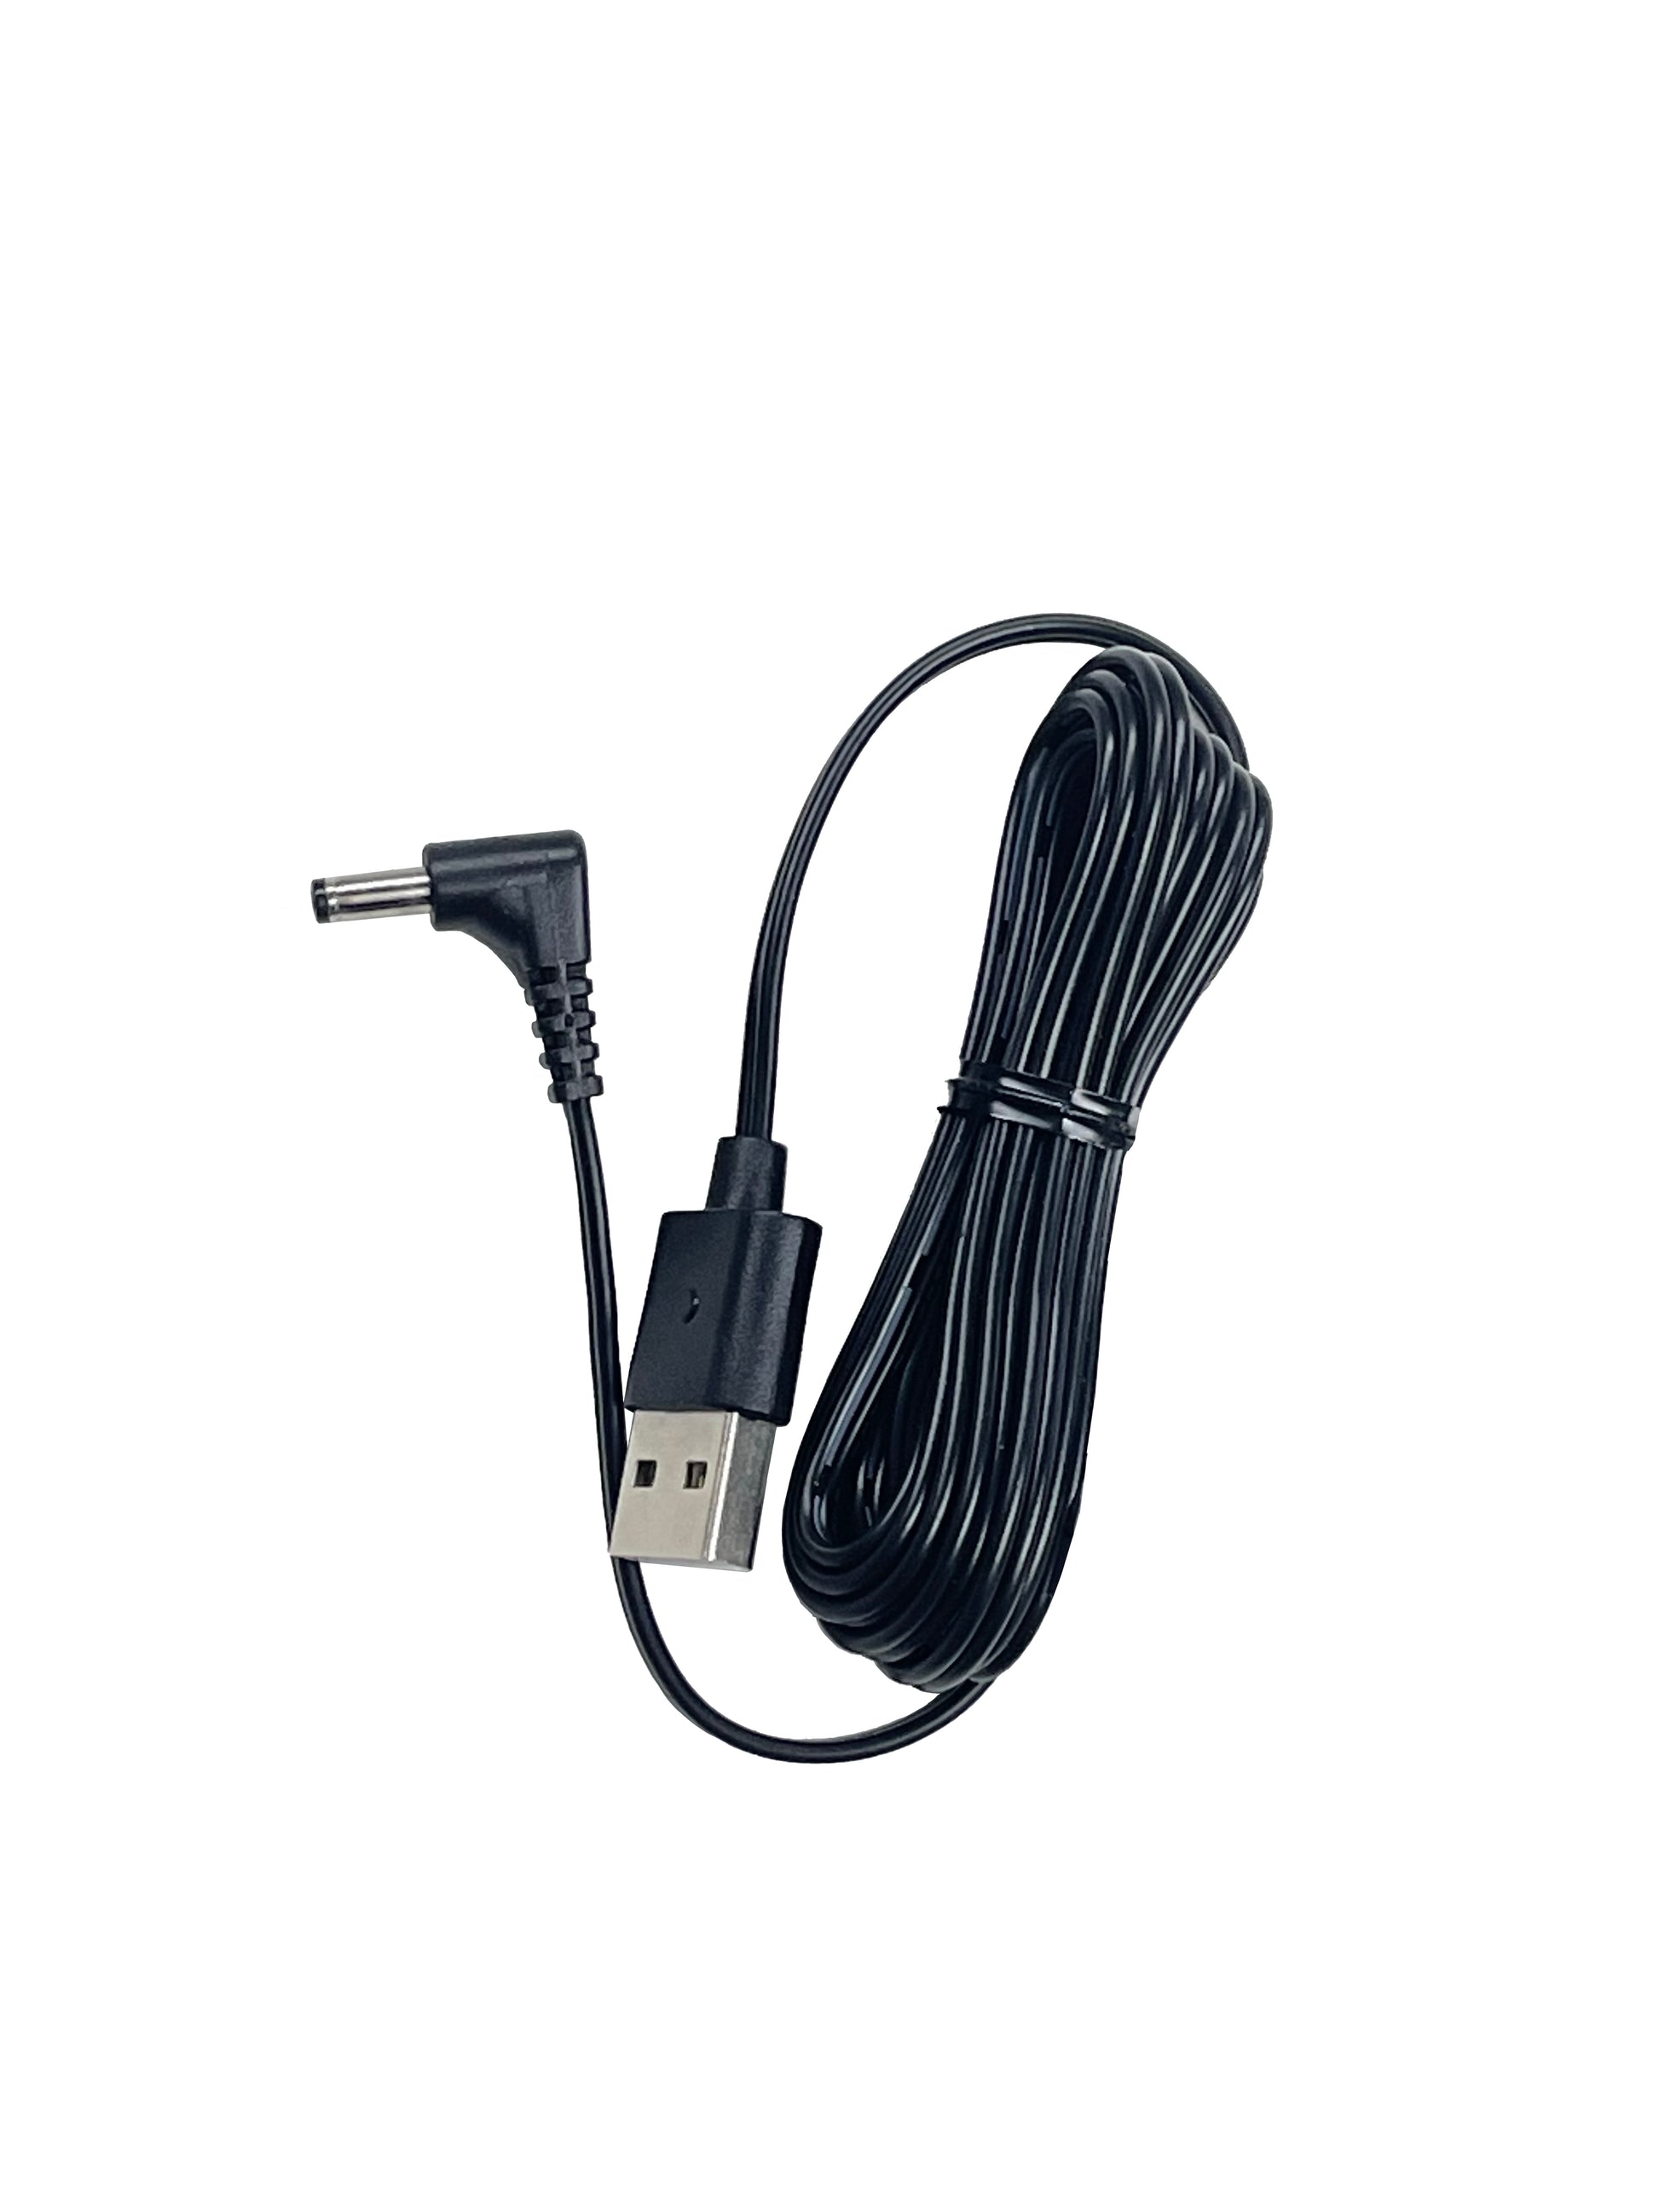 Power cord for HP2550 - Ecowitt (7704625971362)